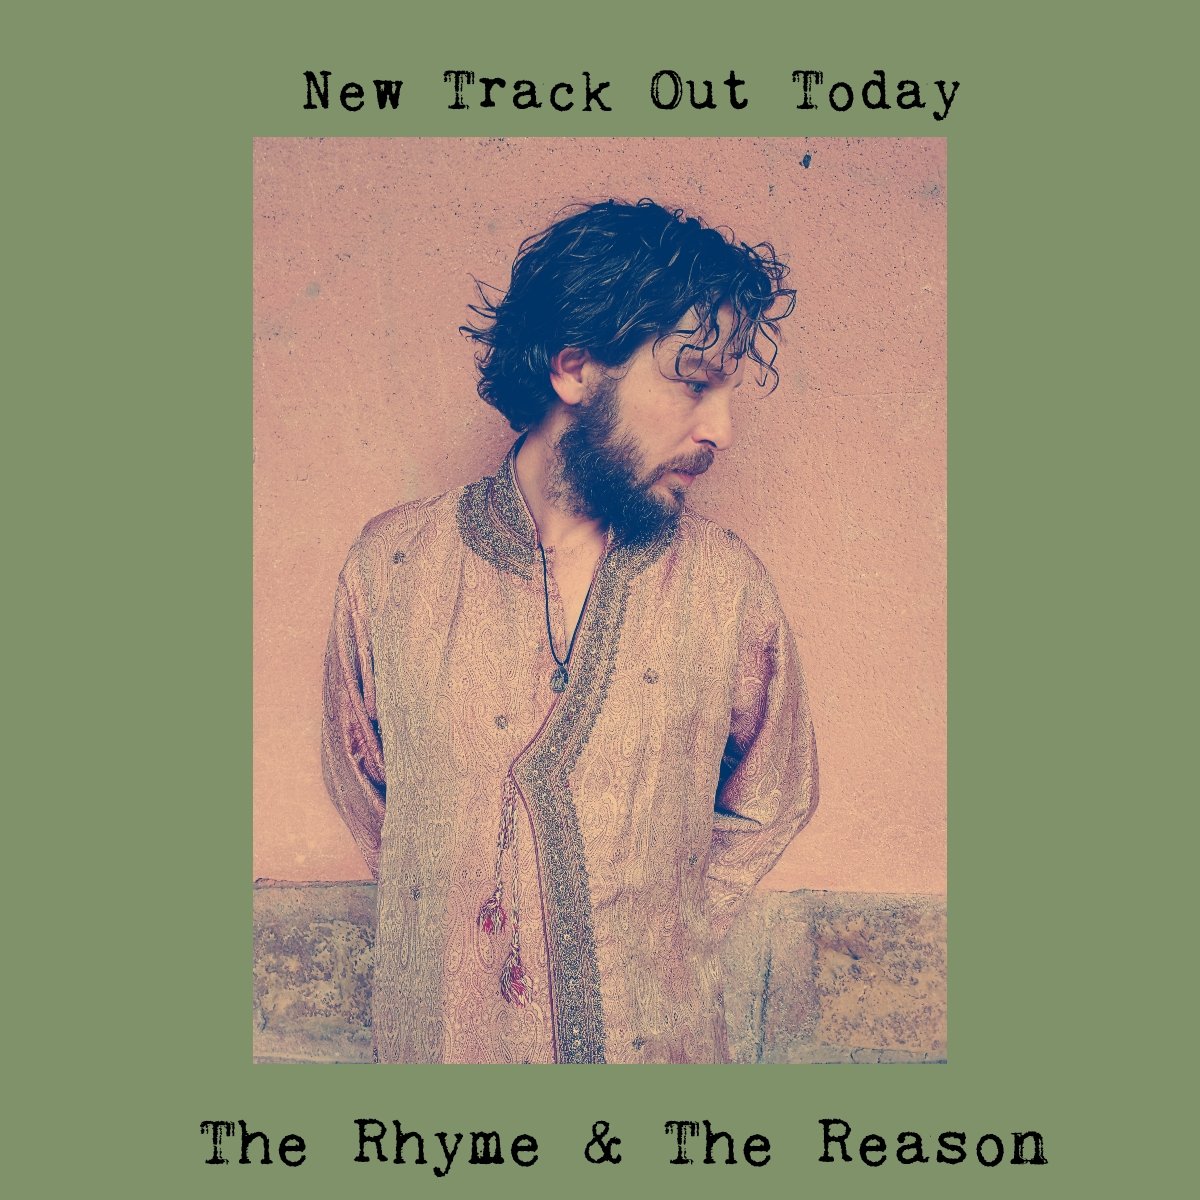 Its Release Day 😀😀😀 'The Rhyme & The Reason' is now available to stream and download. Spotify: spoti.fi/2mn4RQE Apple Music: apple.co/2krvhQF Amazon: amzn.to/2krvV0x